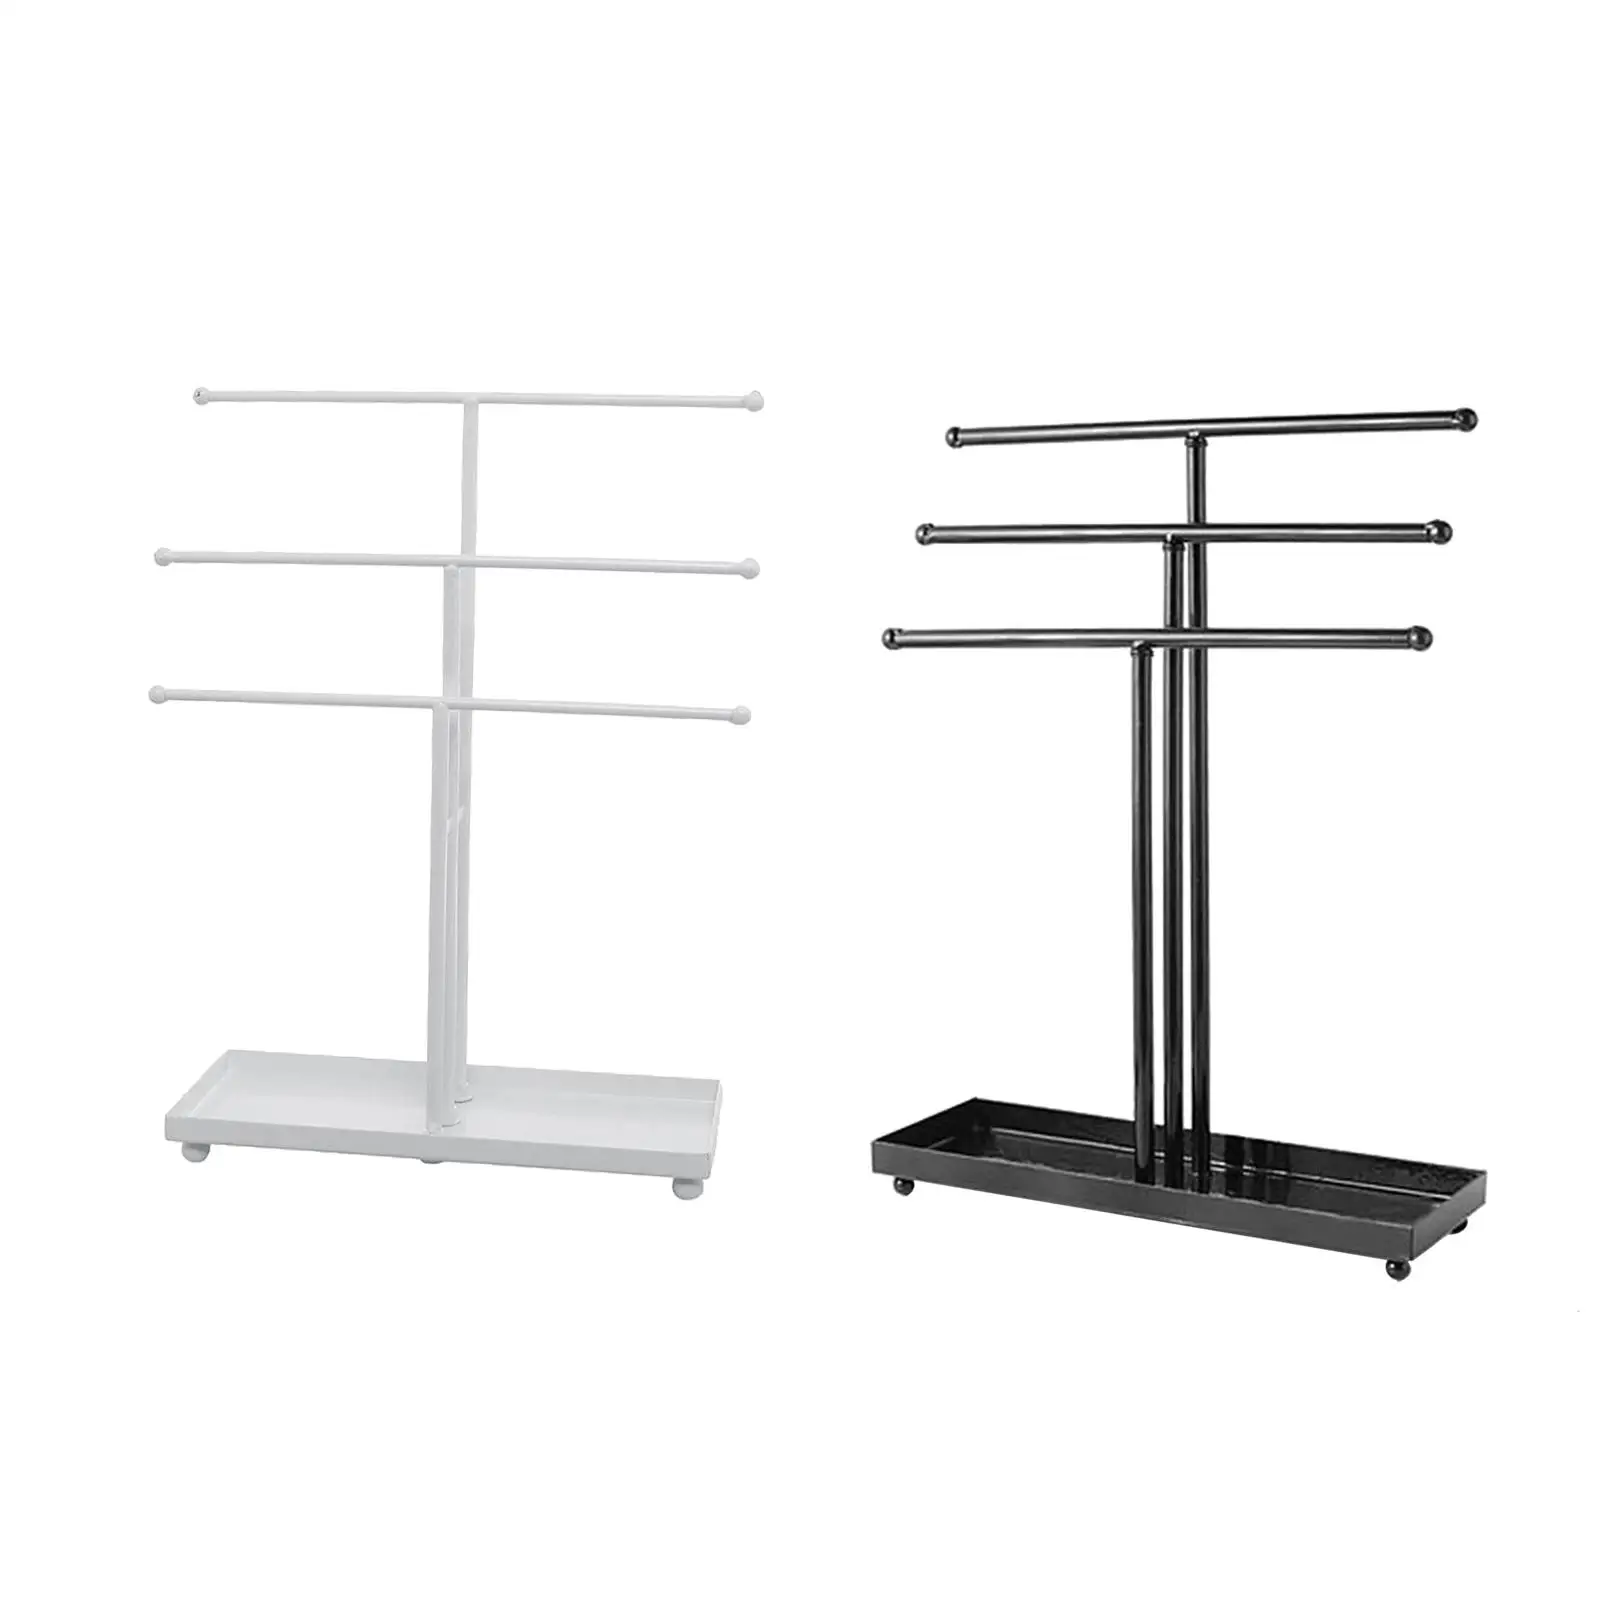 Metal 3 Tiered Jewelry Storage Display Stand, with Base Tray Unique for Your Dresser, Vanity, NightStand or Bathroom Counter